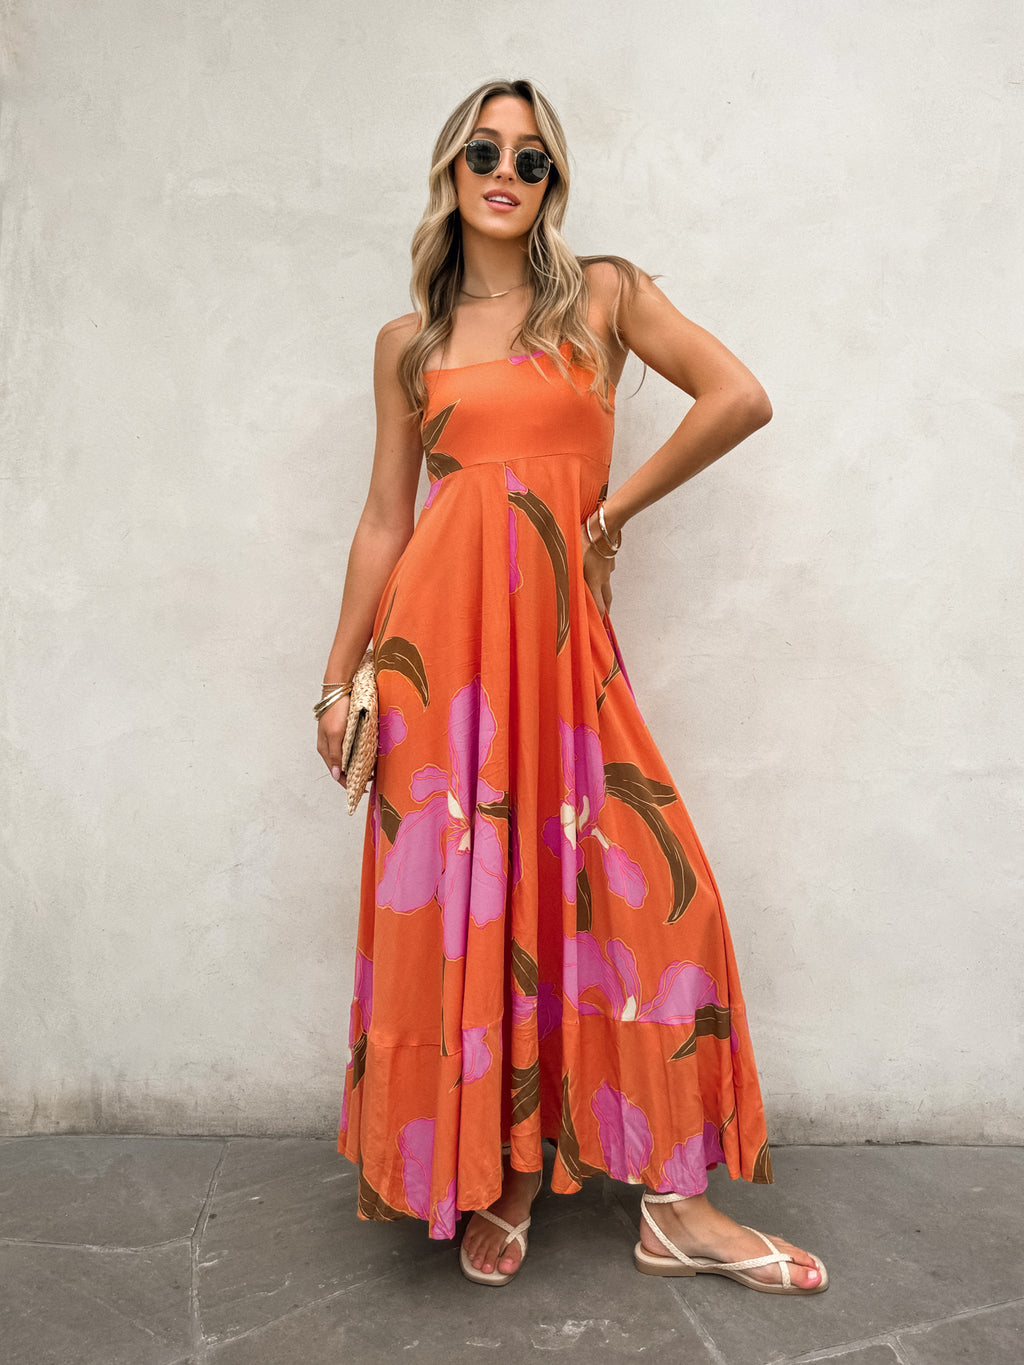 Grapefruit Floral Maxi Dress - Stitch And Feather